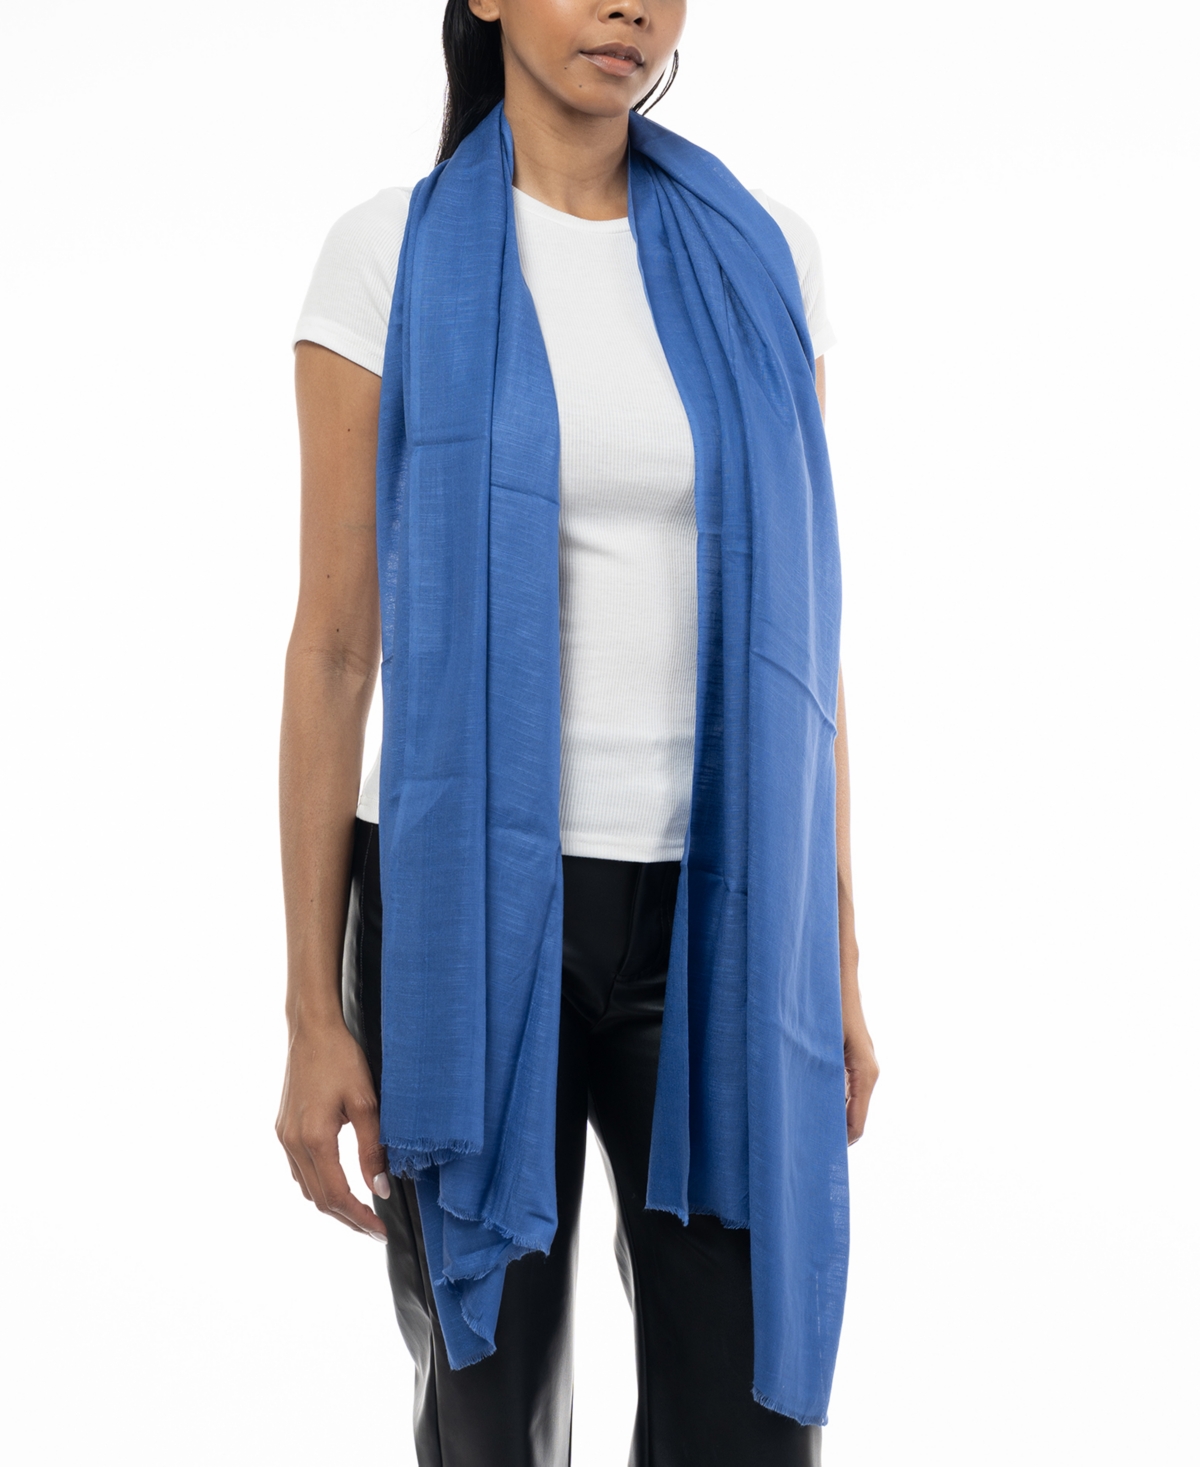 Women's Soft Sheen Fringe-Trim Scarf, Created for Macy's - Turquoise